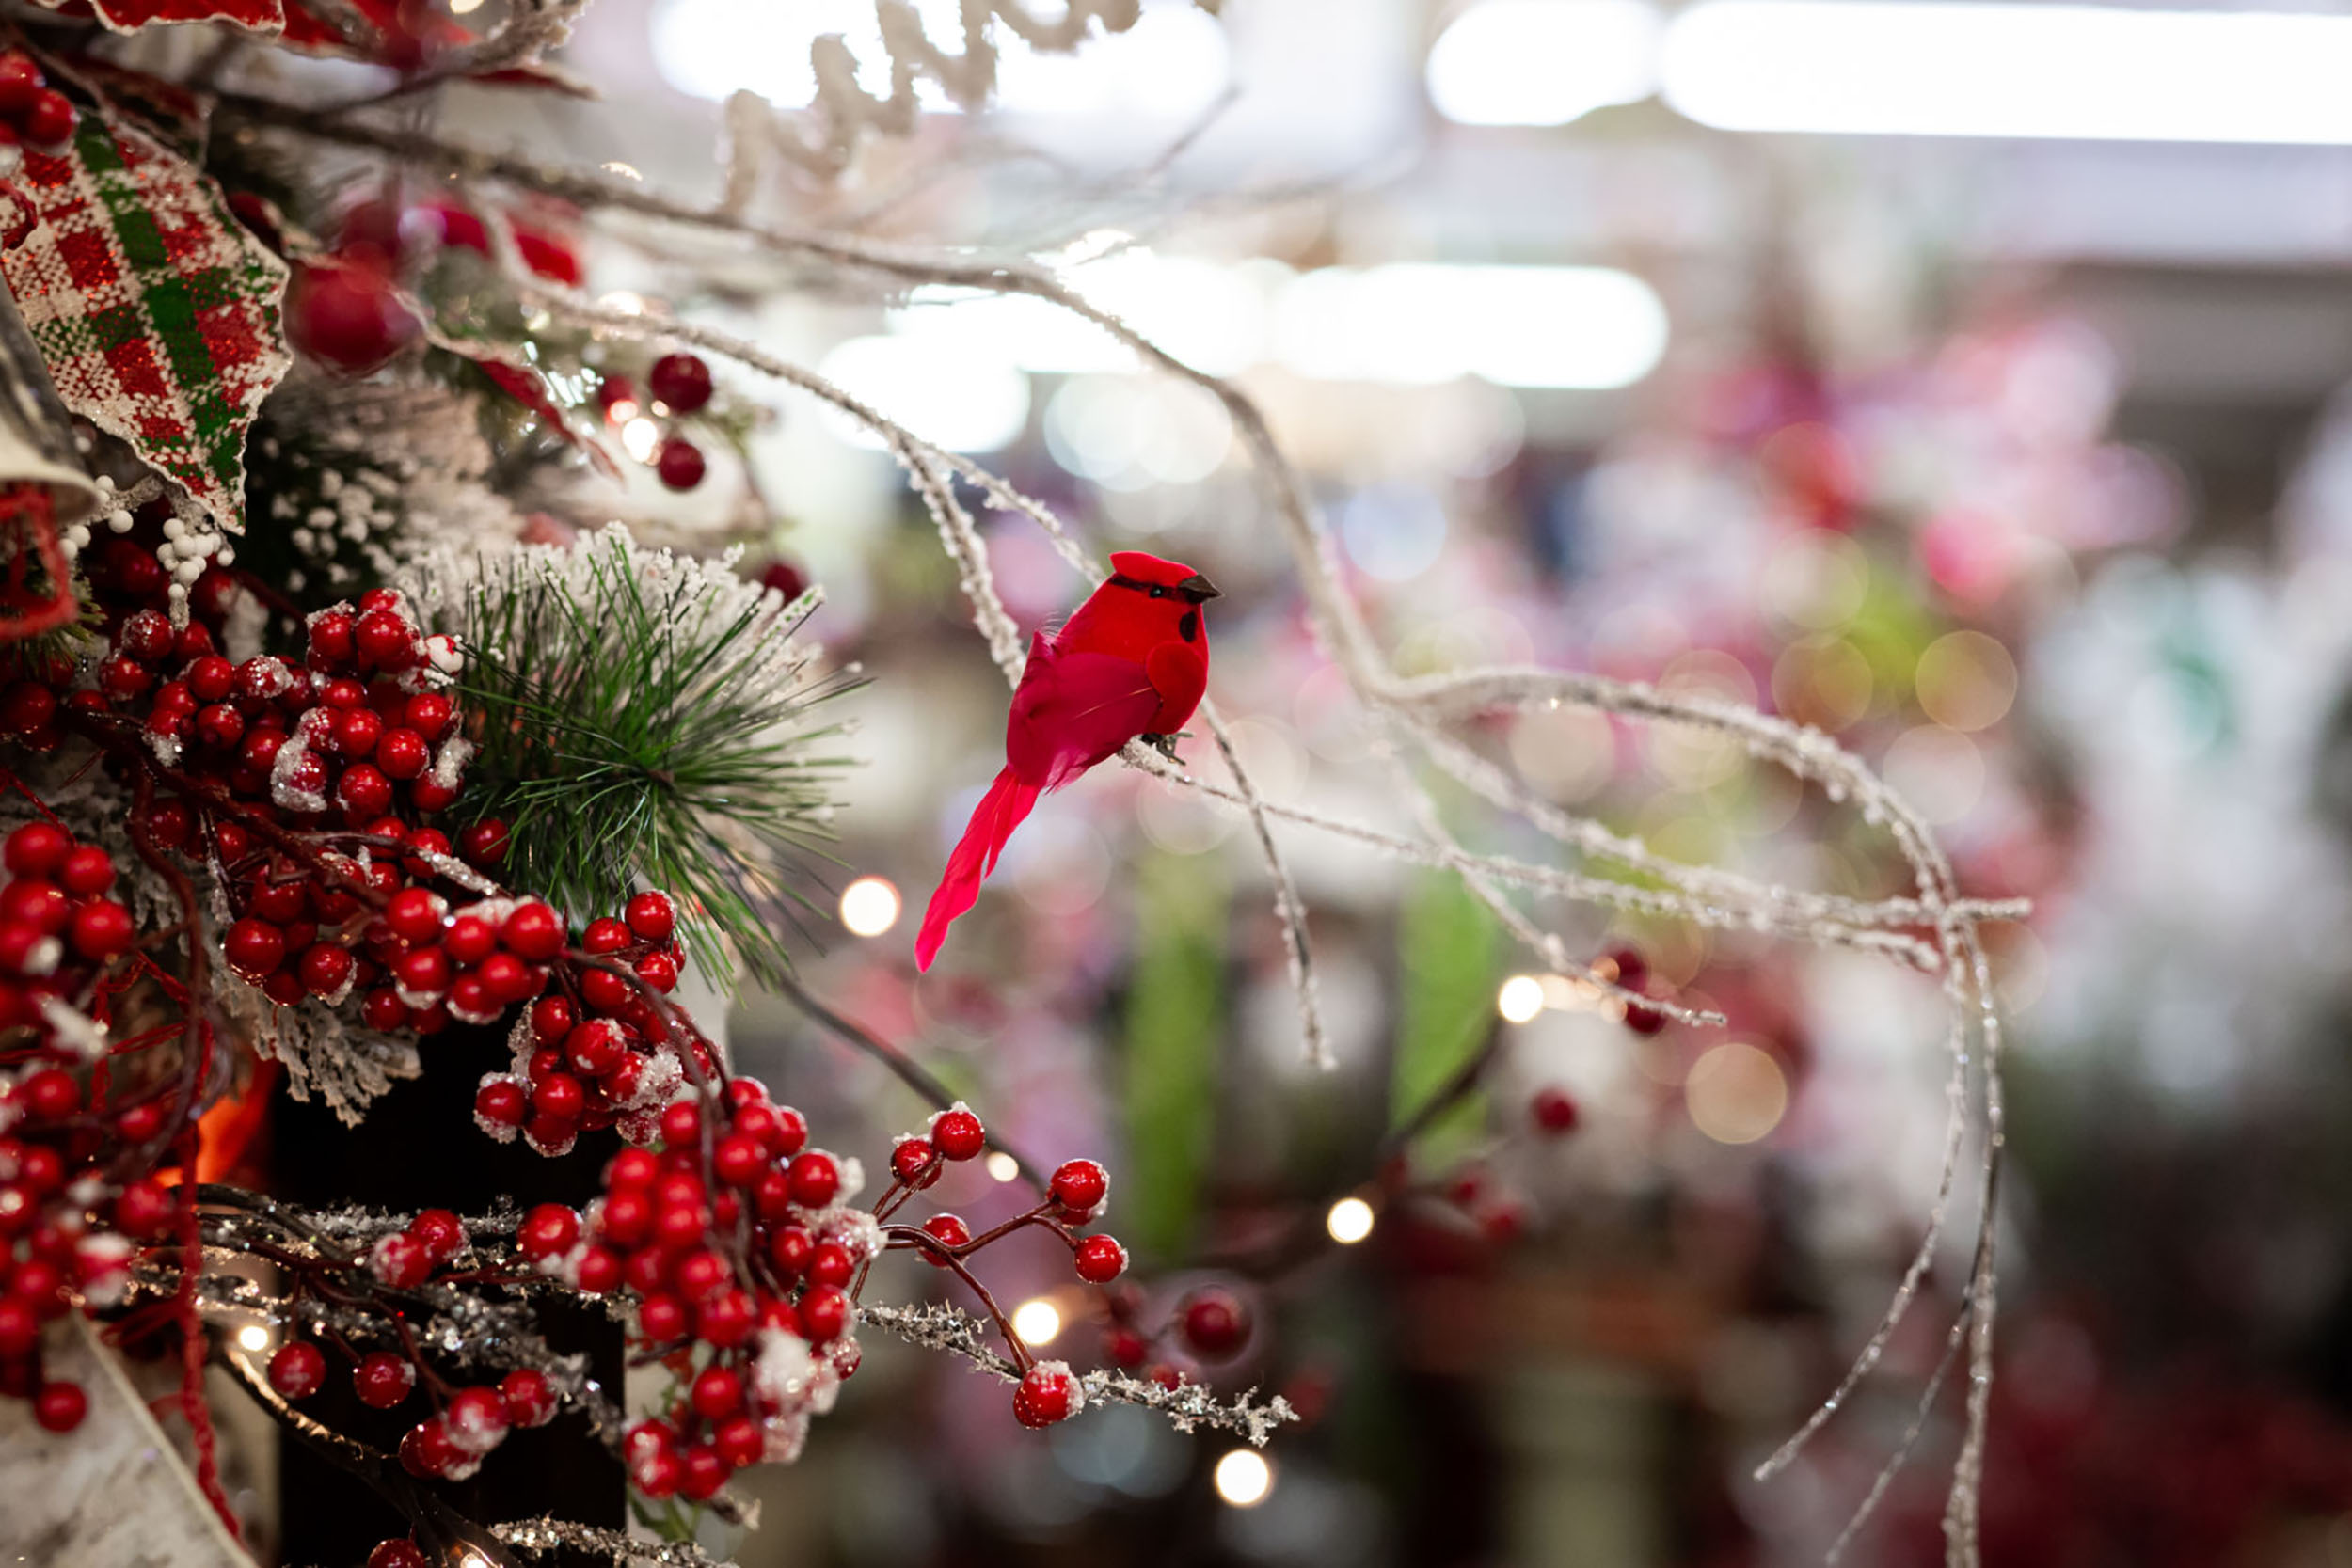 Photo of decorations at Decorator's Warehouse, close up of a cardinal